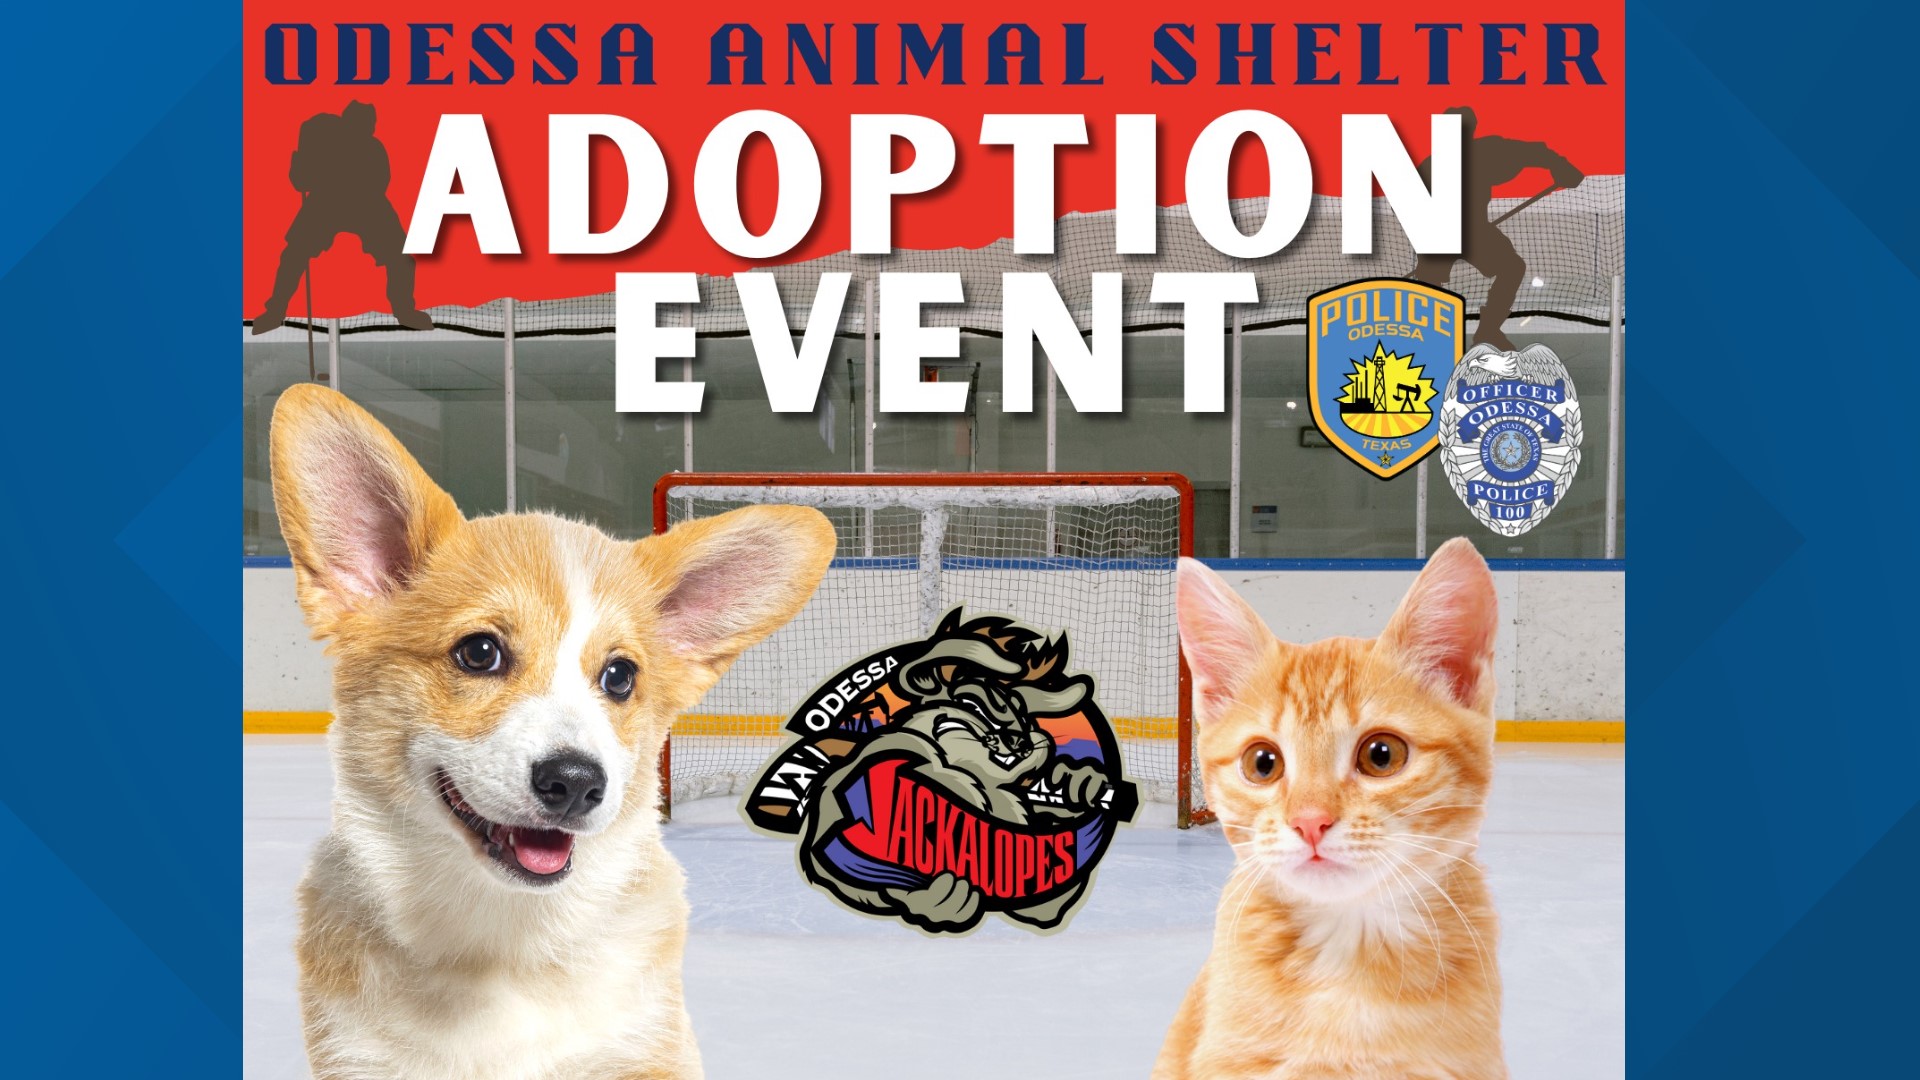 The events will take place on March 24 and 25 at the Odessa Jackalopes hockey games in Ector County Coliseum.